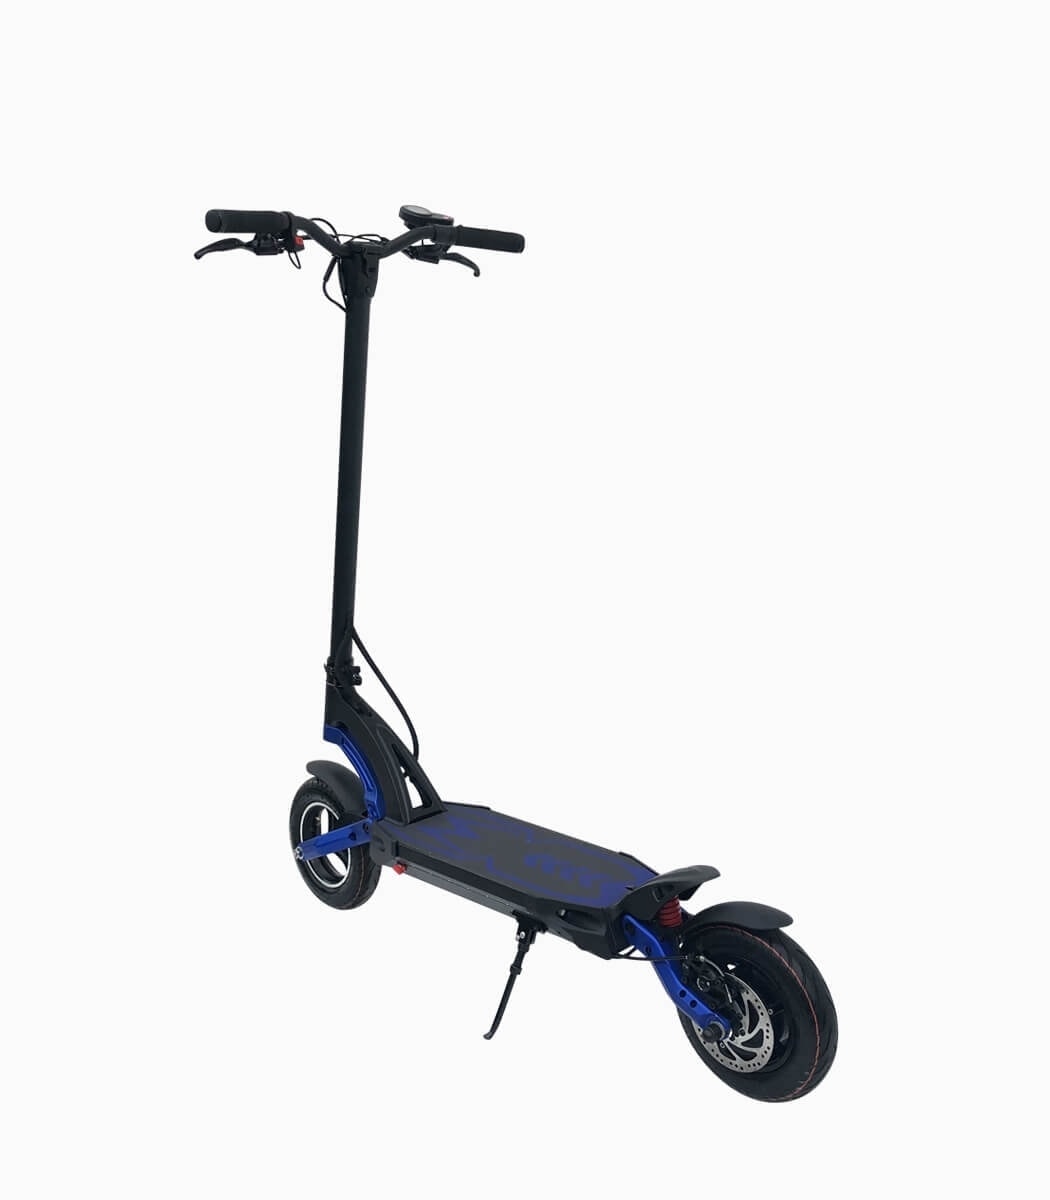 MOBOT MANTIS (BLUE10AH) UL2272 certified high performance electric scooter rear angled left